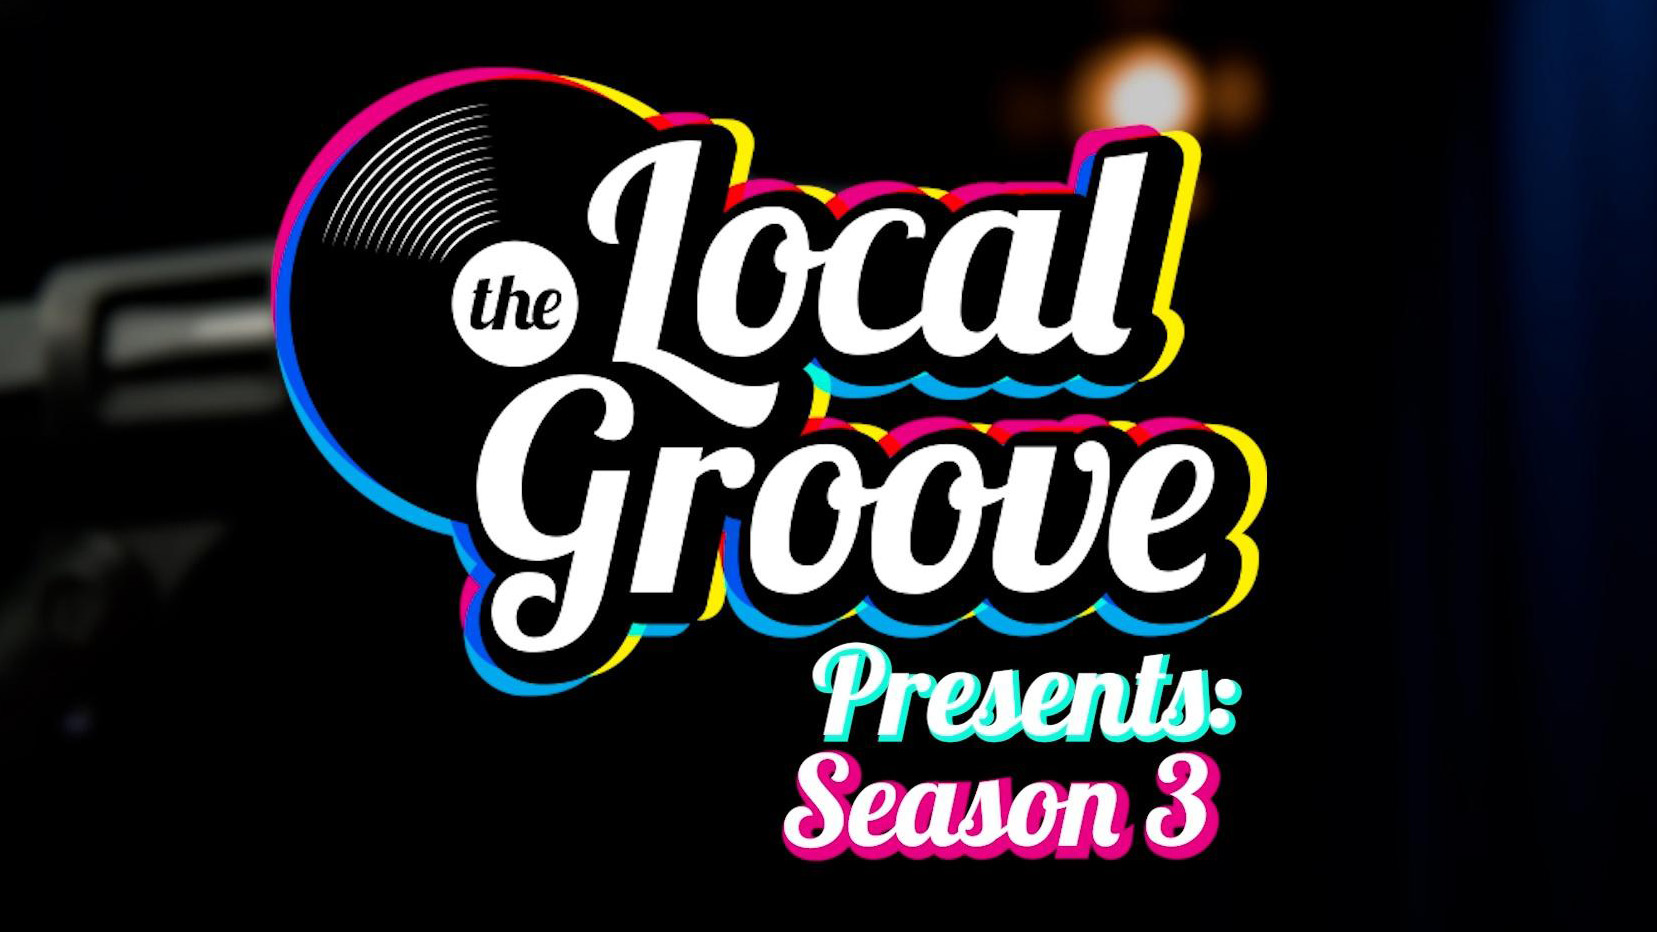 The Local Groove Presents logo on a black background.